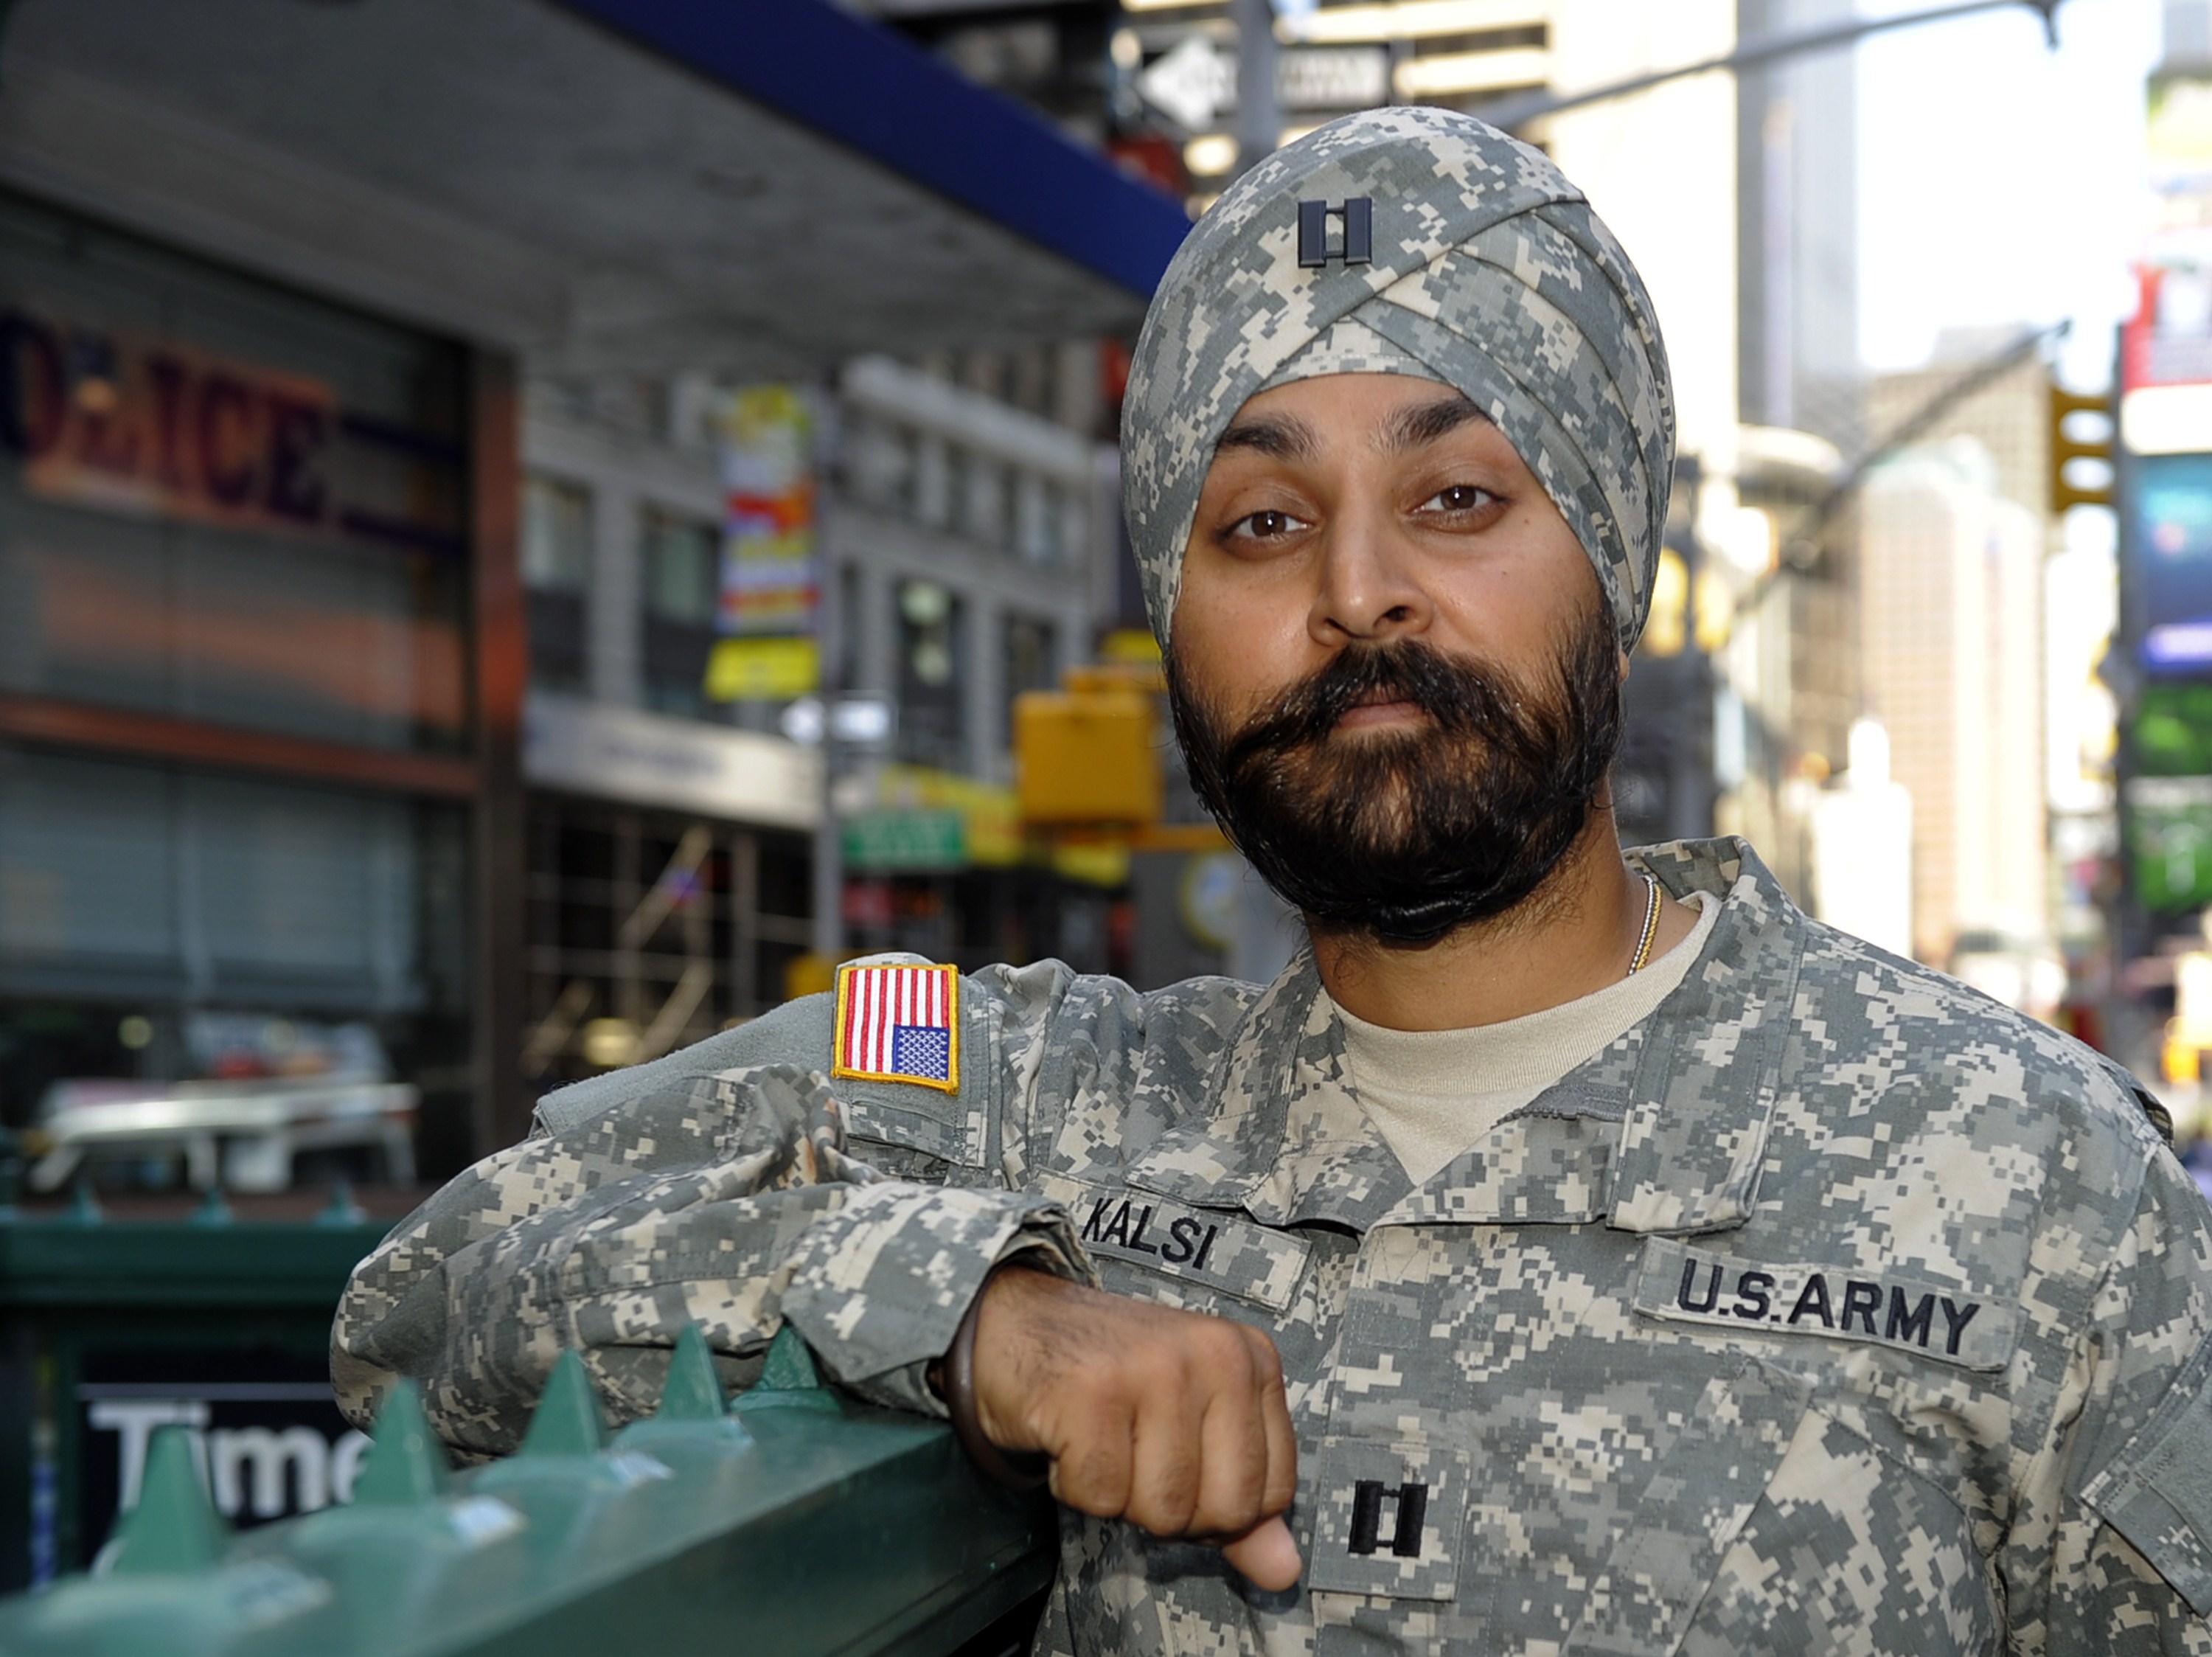 Army Major Kamal Kalsi, a Sikh doctor based at Fort Bragg, N.C., earned the Bronze Star in Afghanistan. (Timothy A. Clary—AFP/Getty Images)